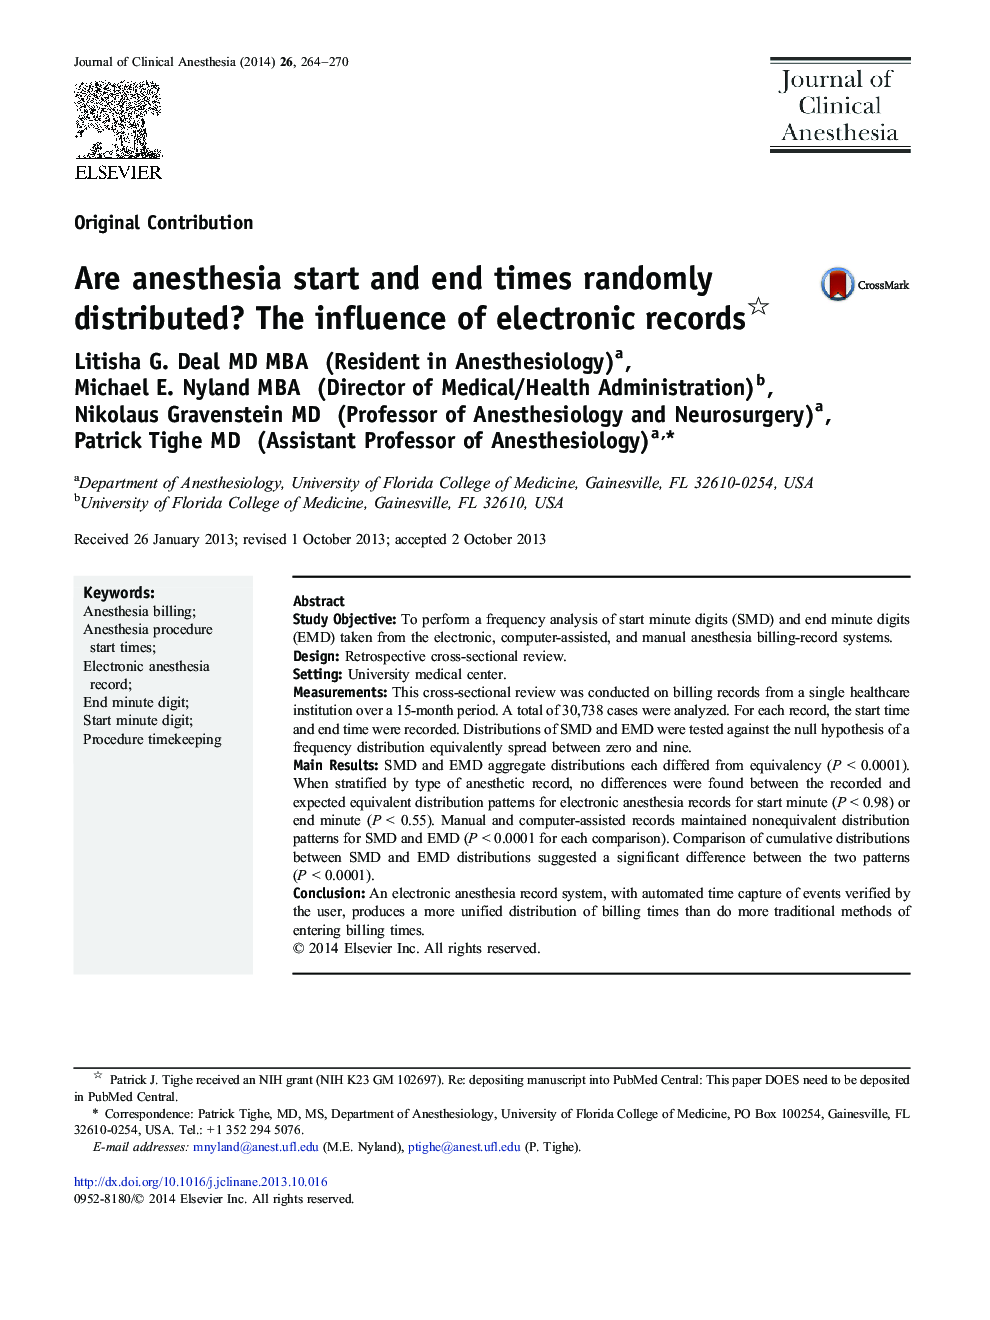 Are anesthesia start and end times randomly distributed? The influence of electronic records 